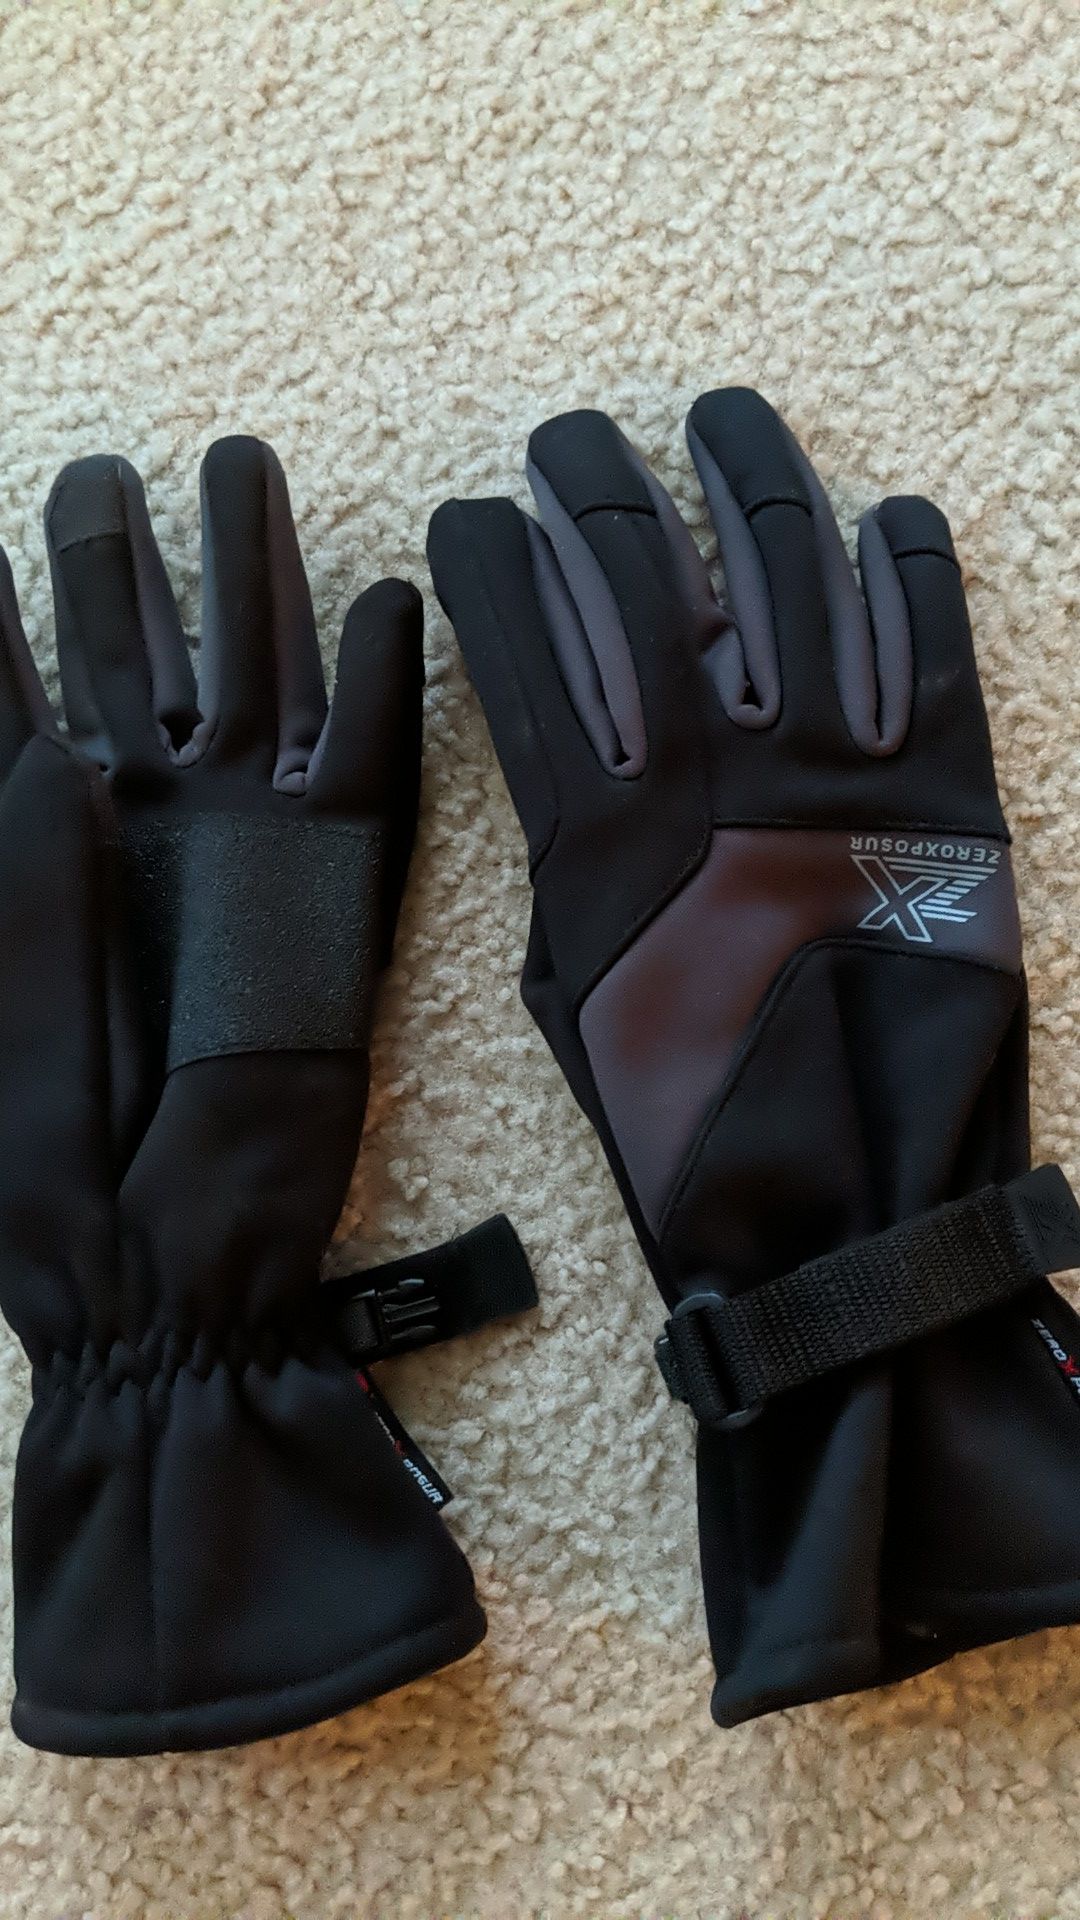 Touch-Screen Gloves